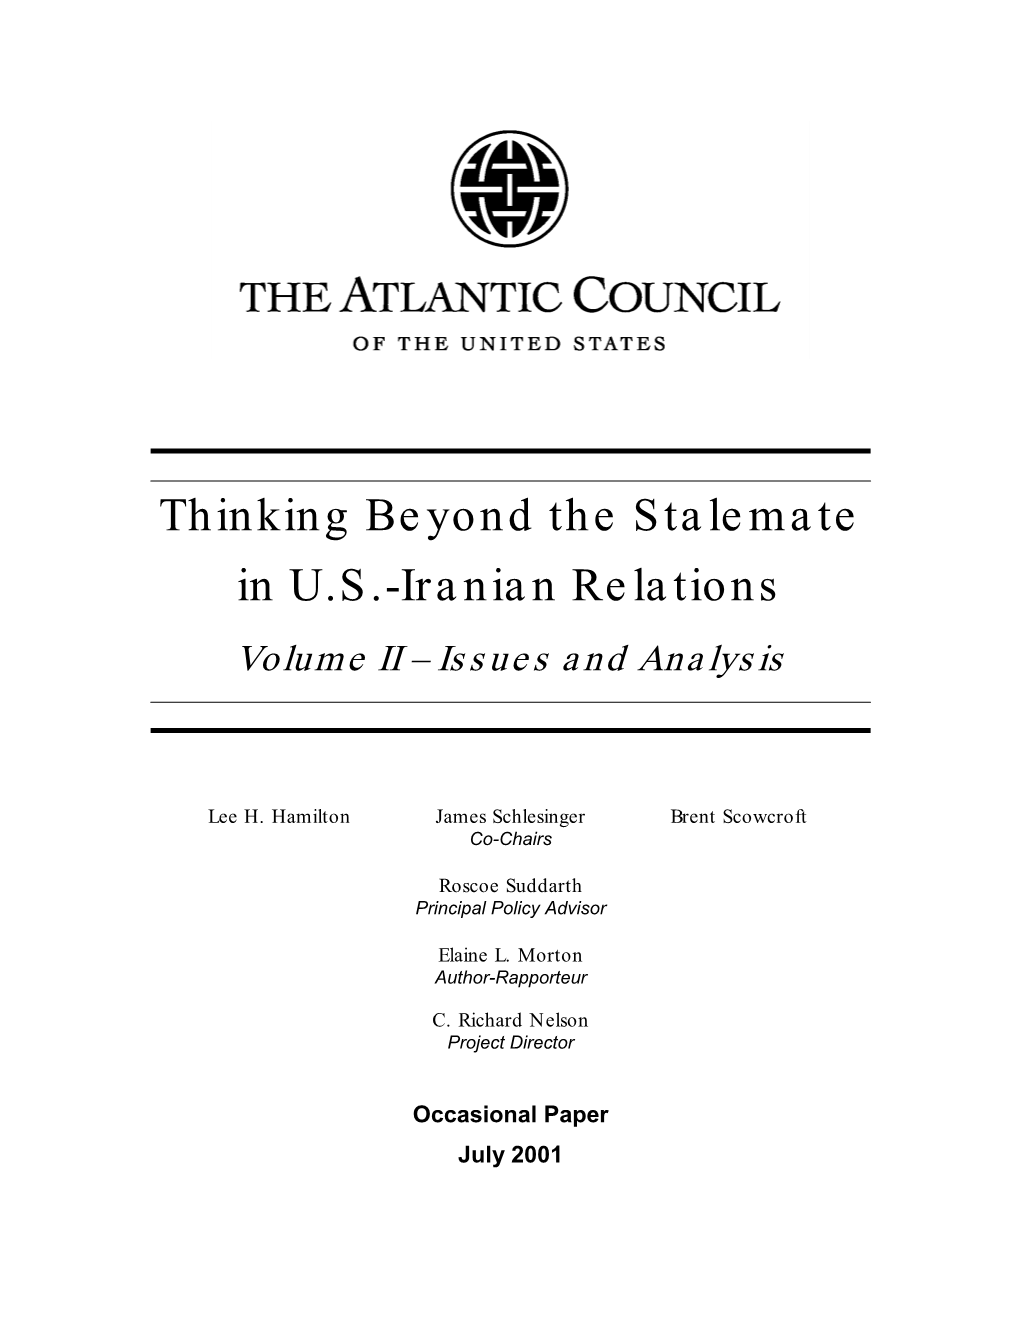 Thinking Beyond the Stalemate in US-Iranian Relations, Volume II